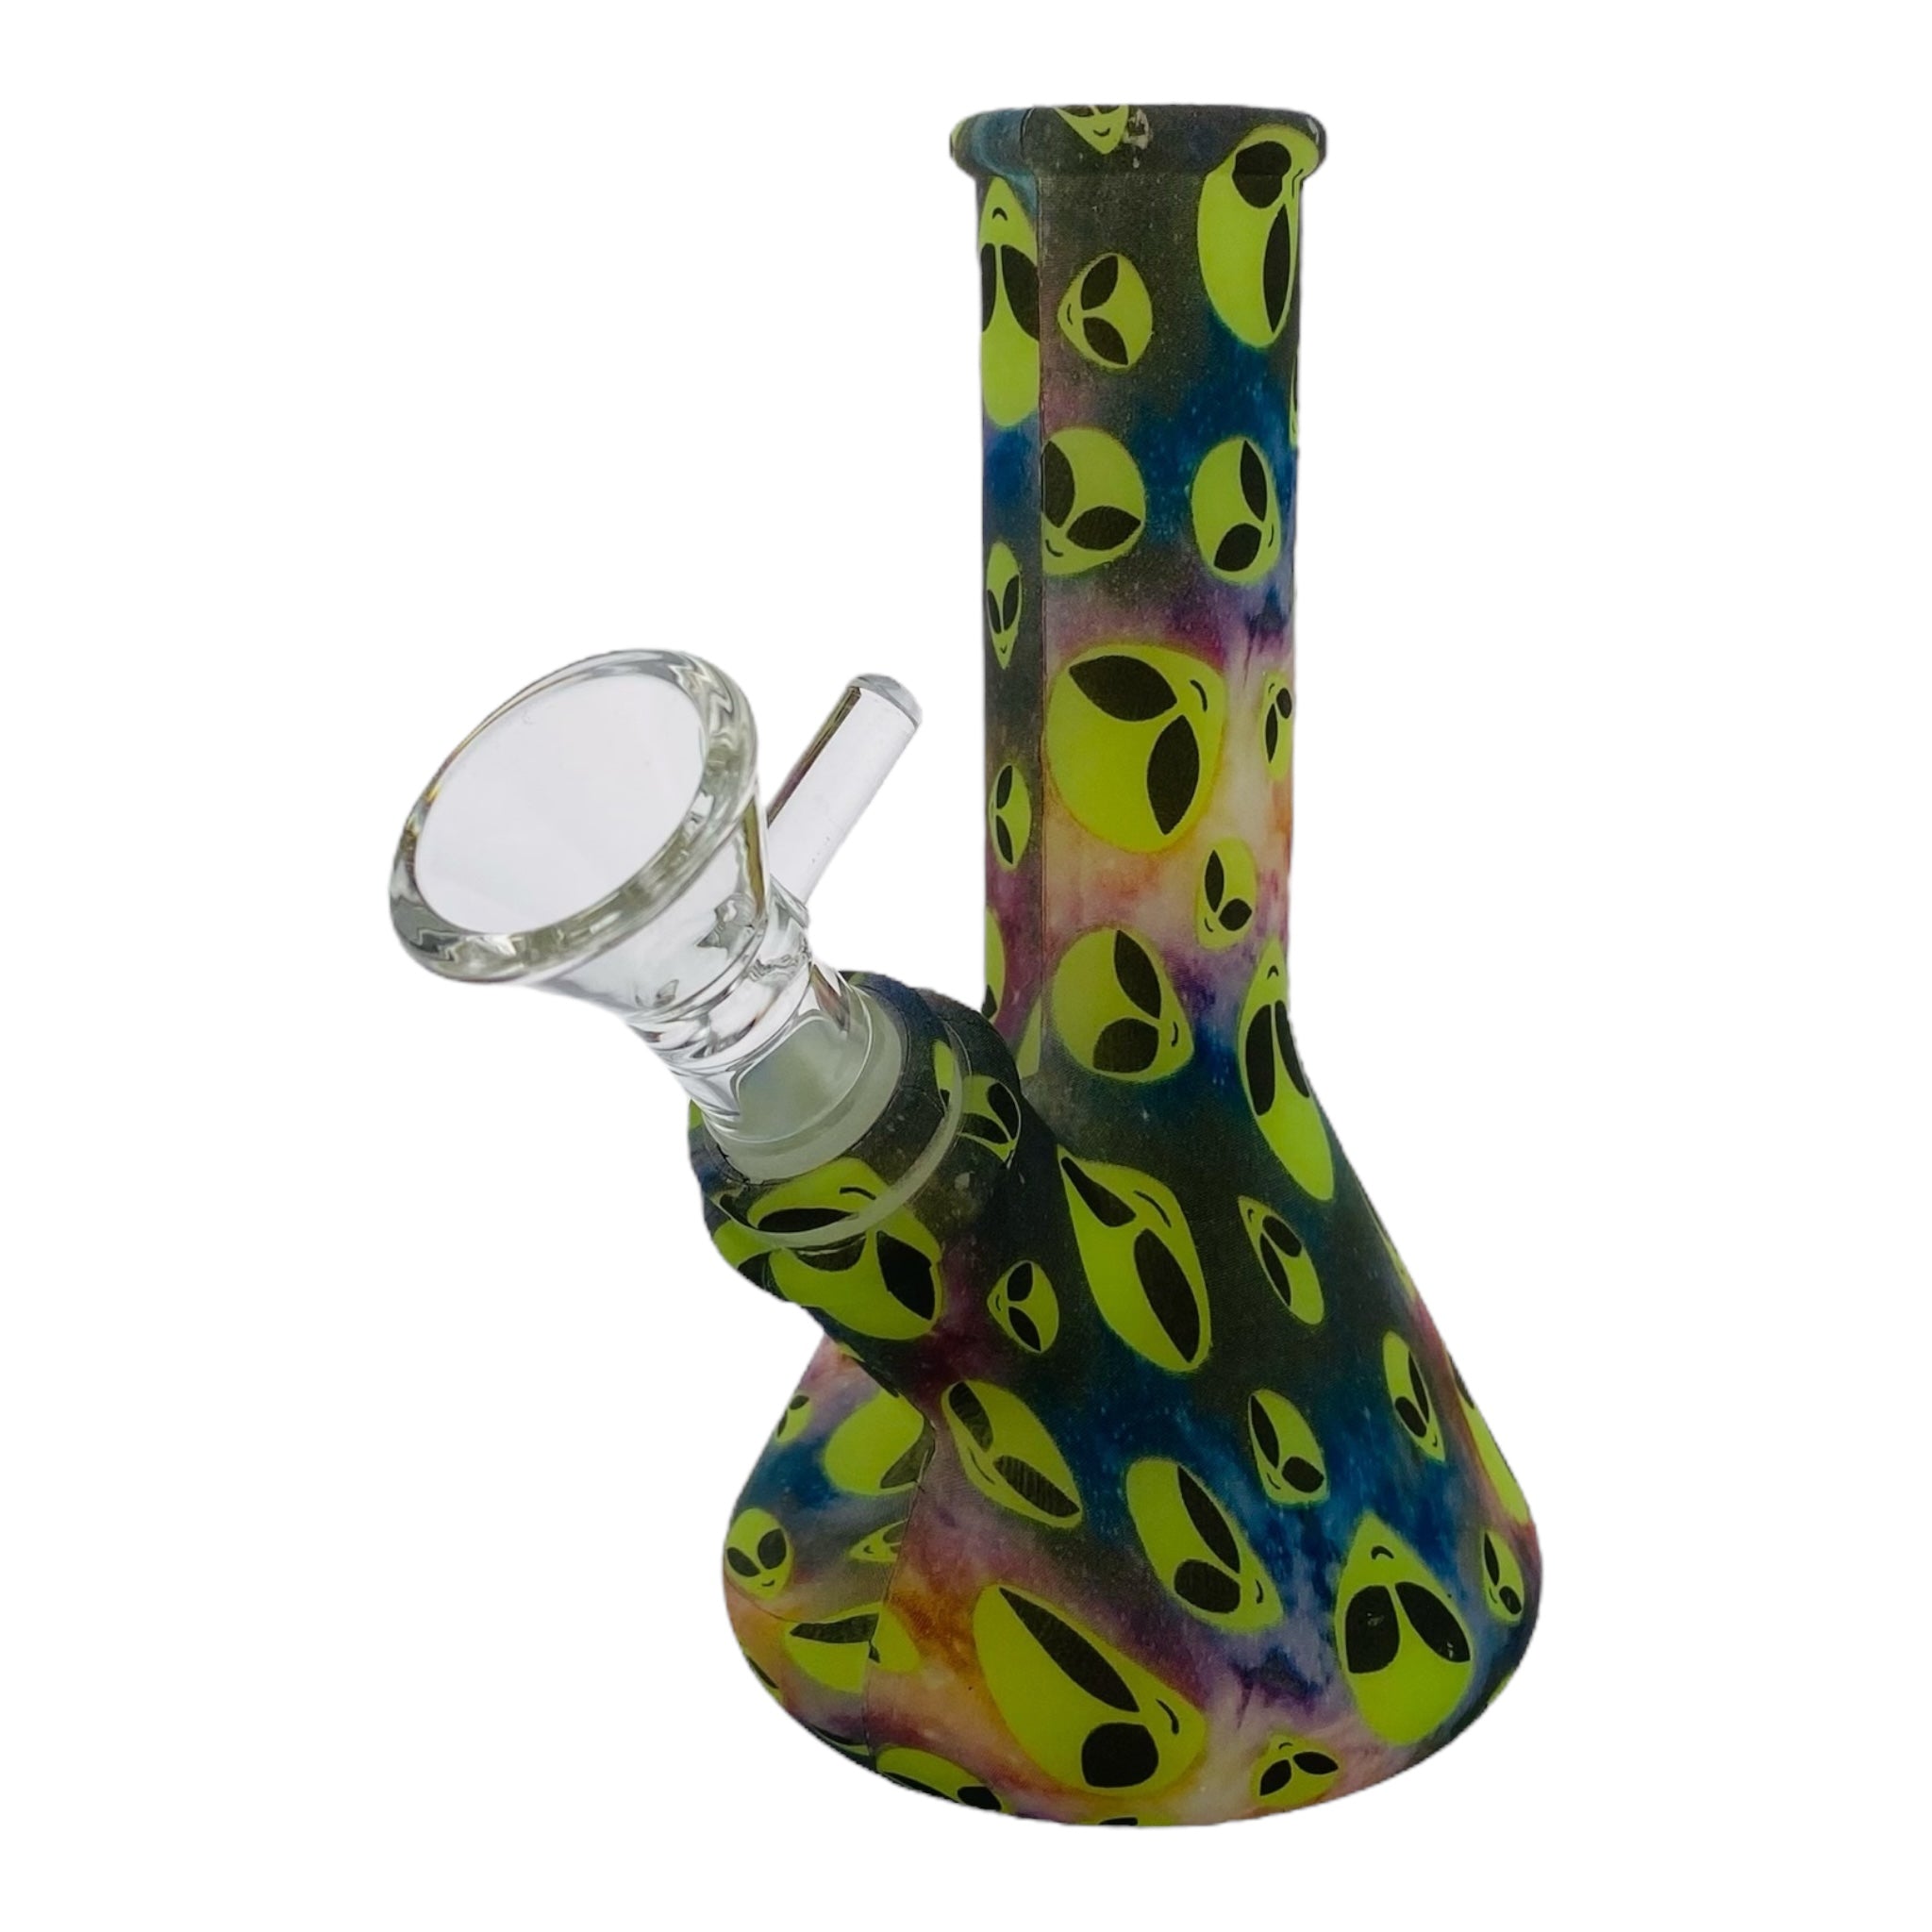 5 Inch cute Mini Silicone Rubber Bong With Alien Heads